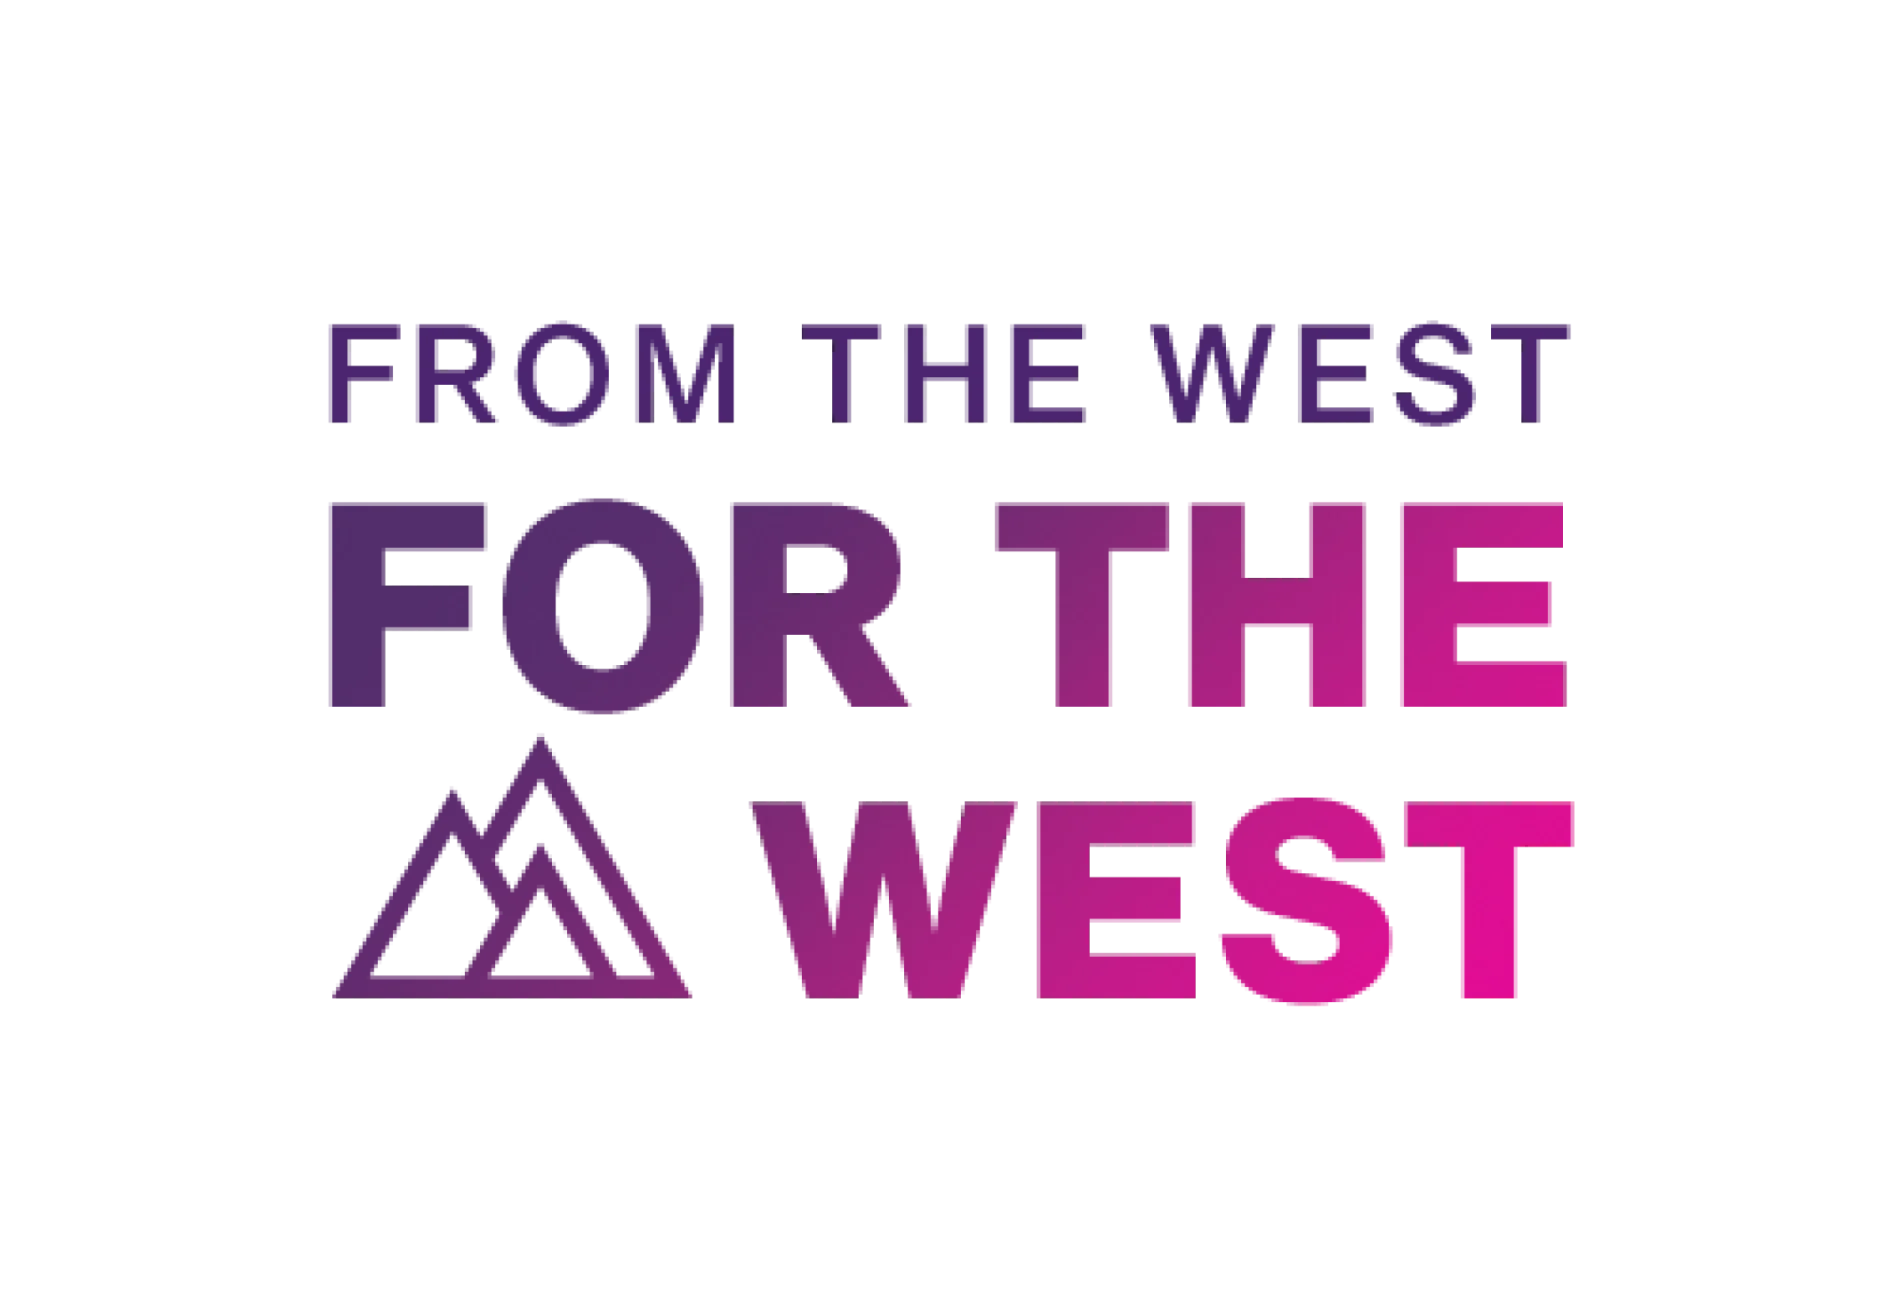 Love from the West logo, with the slogan: From the West, for the West.